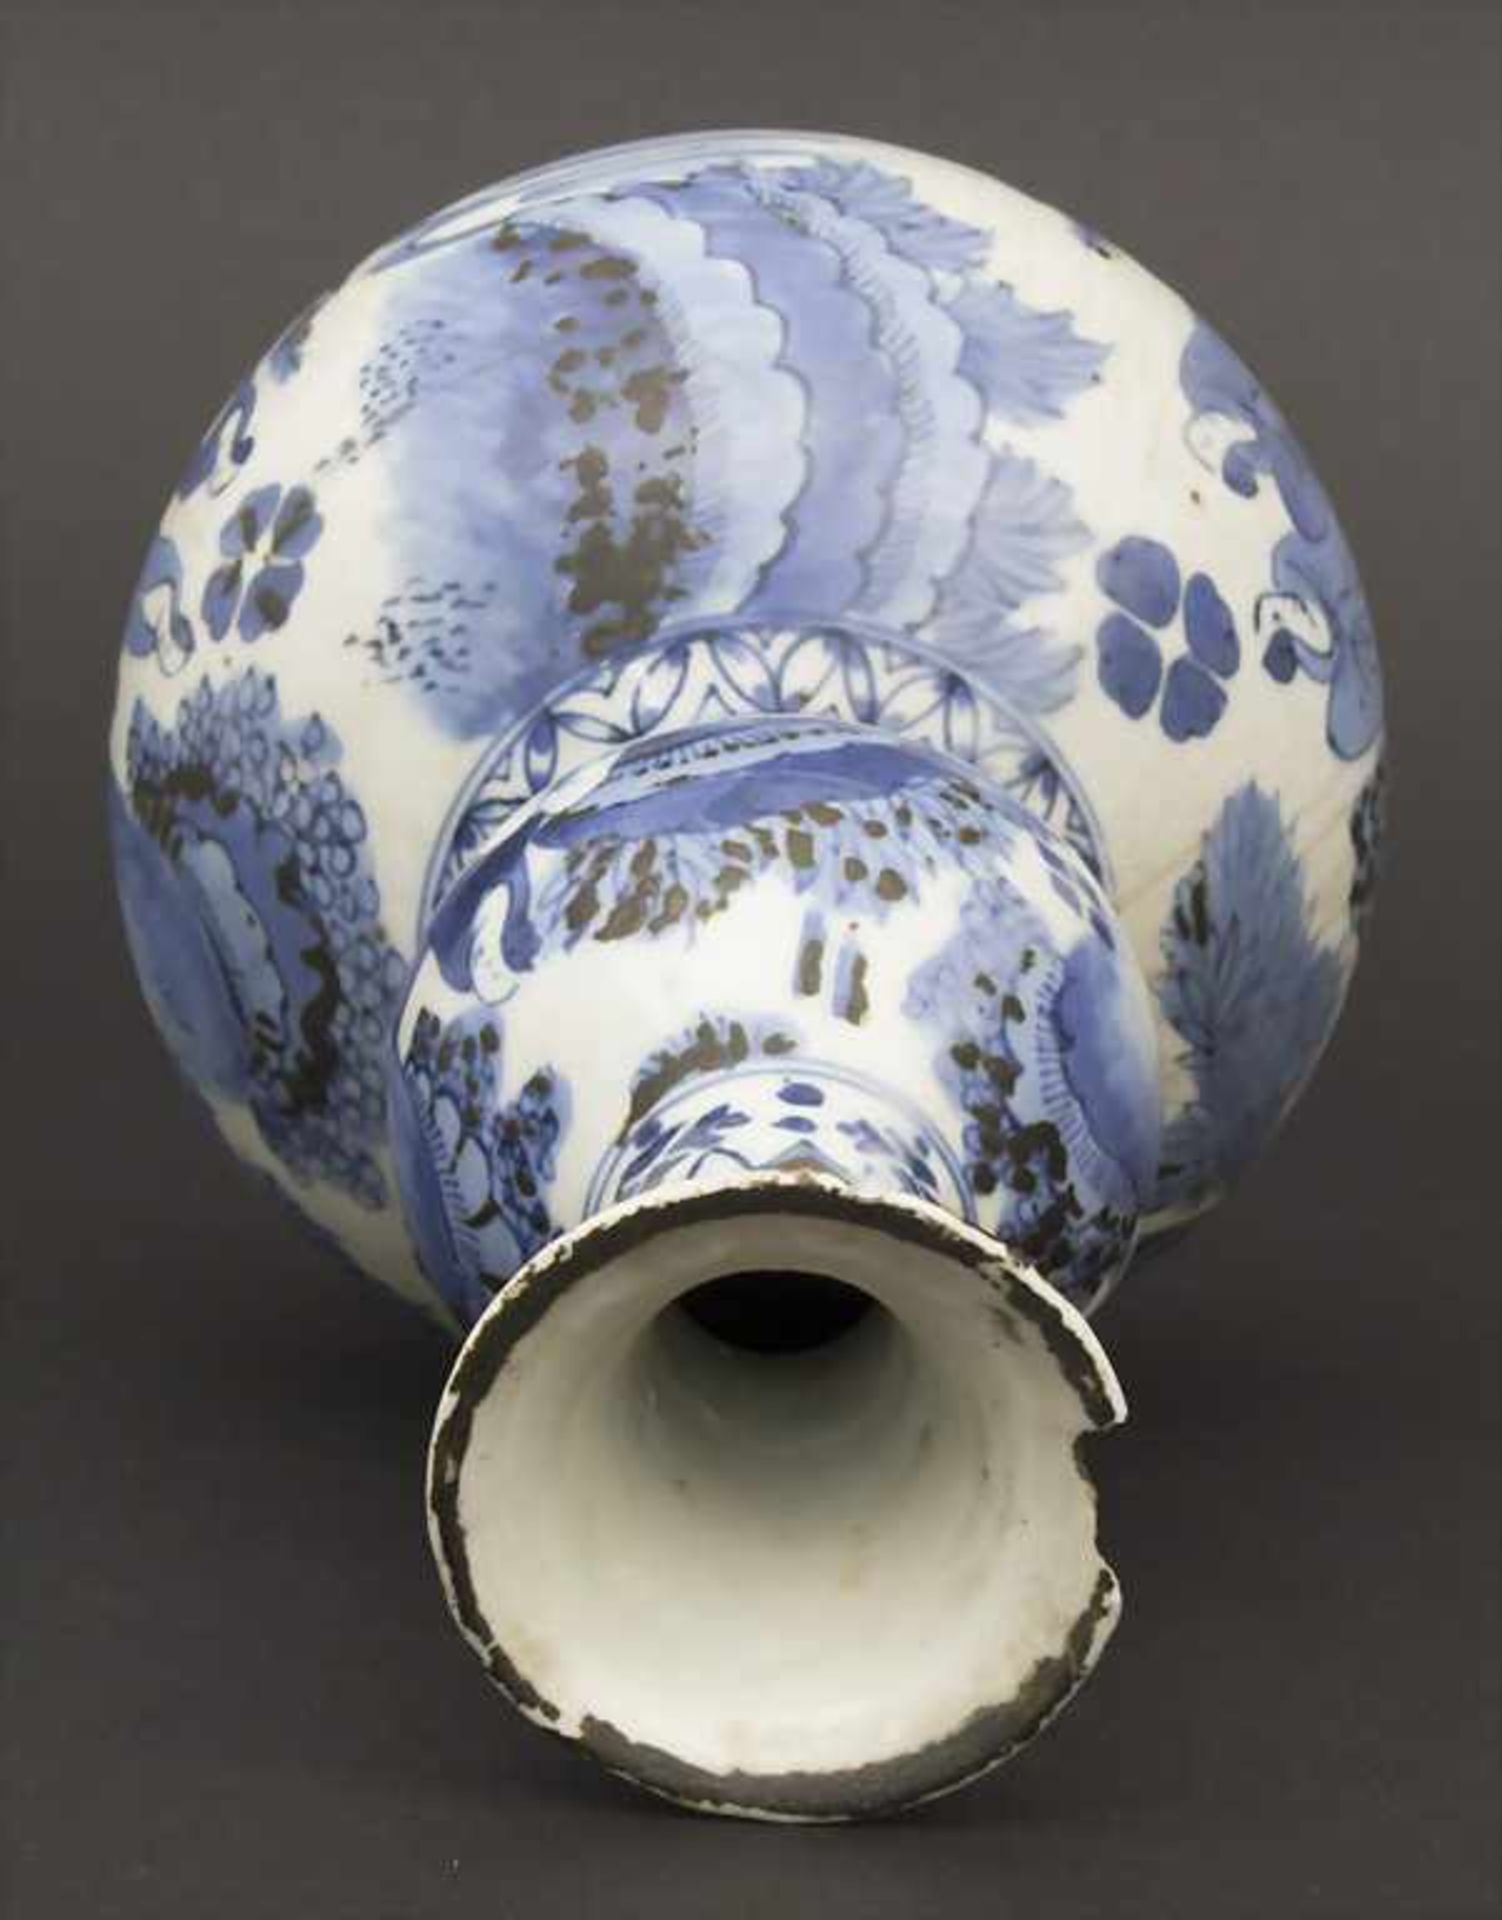 Ziervase / A vase, China, Ming/Qing- Dynastie - Image 4 of 7